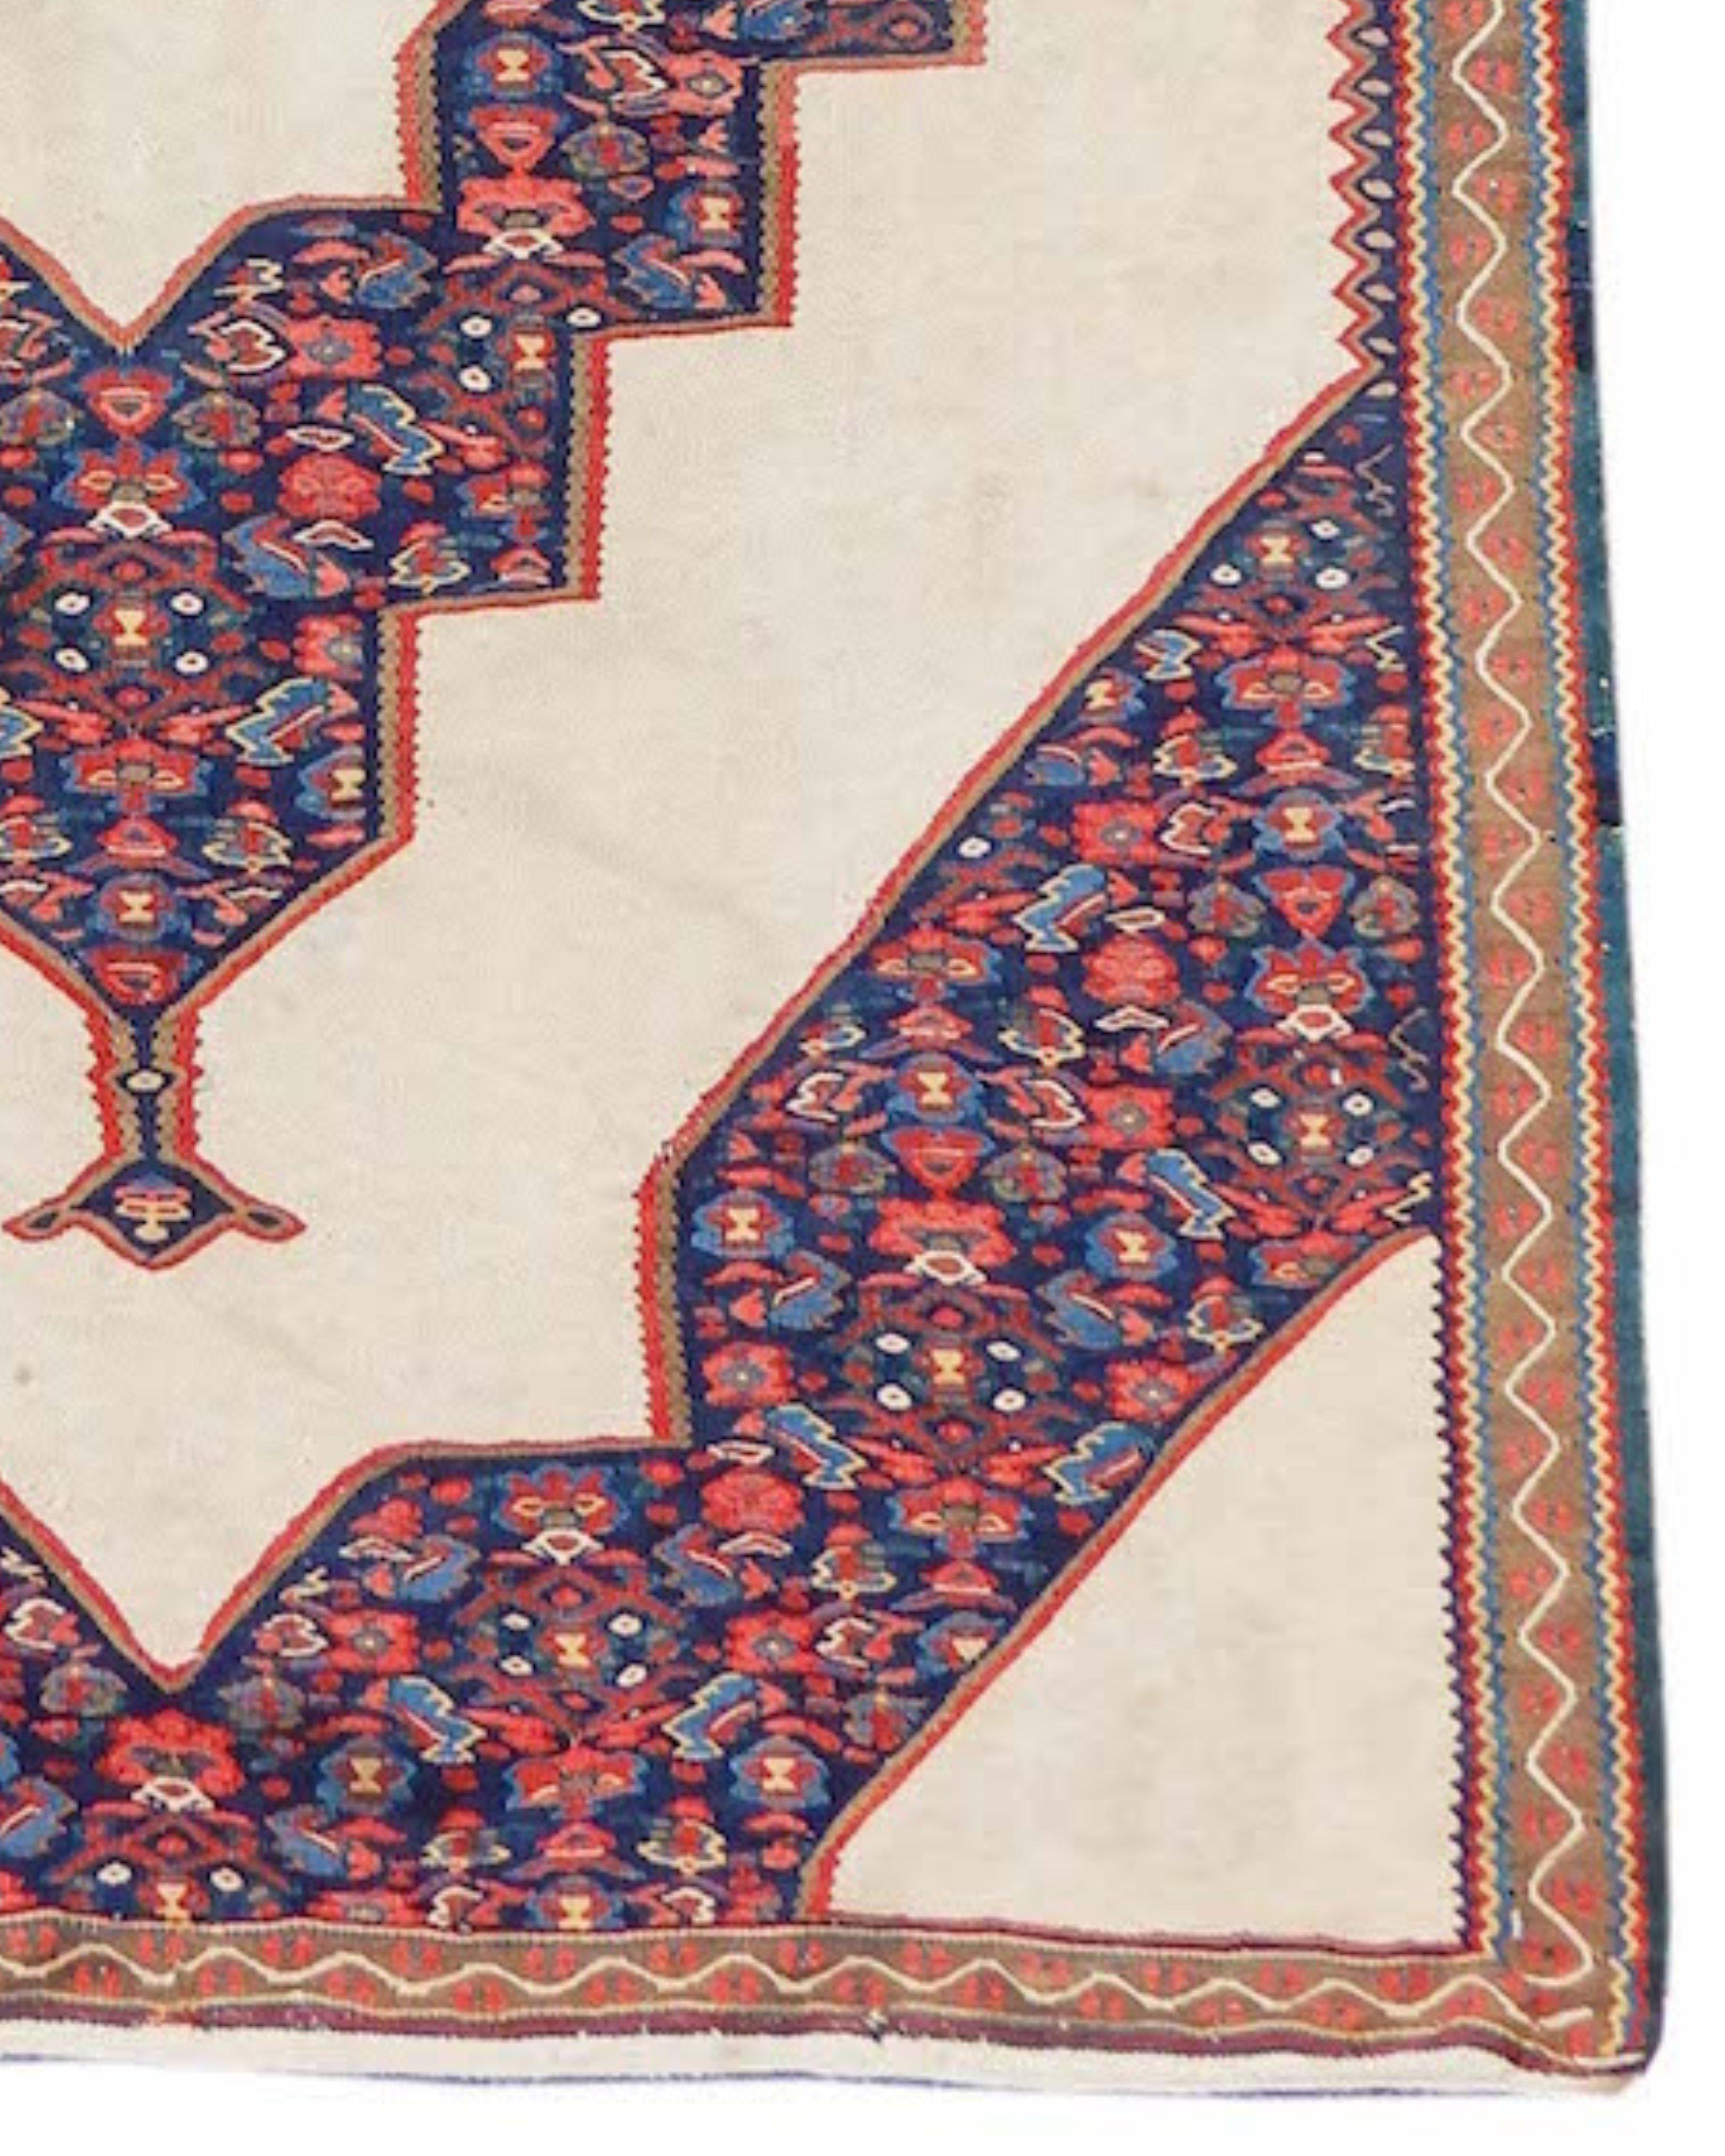 Senneh Kilim Rug, c. 1900 In Good Condition For Sale In San Francisco, CA